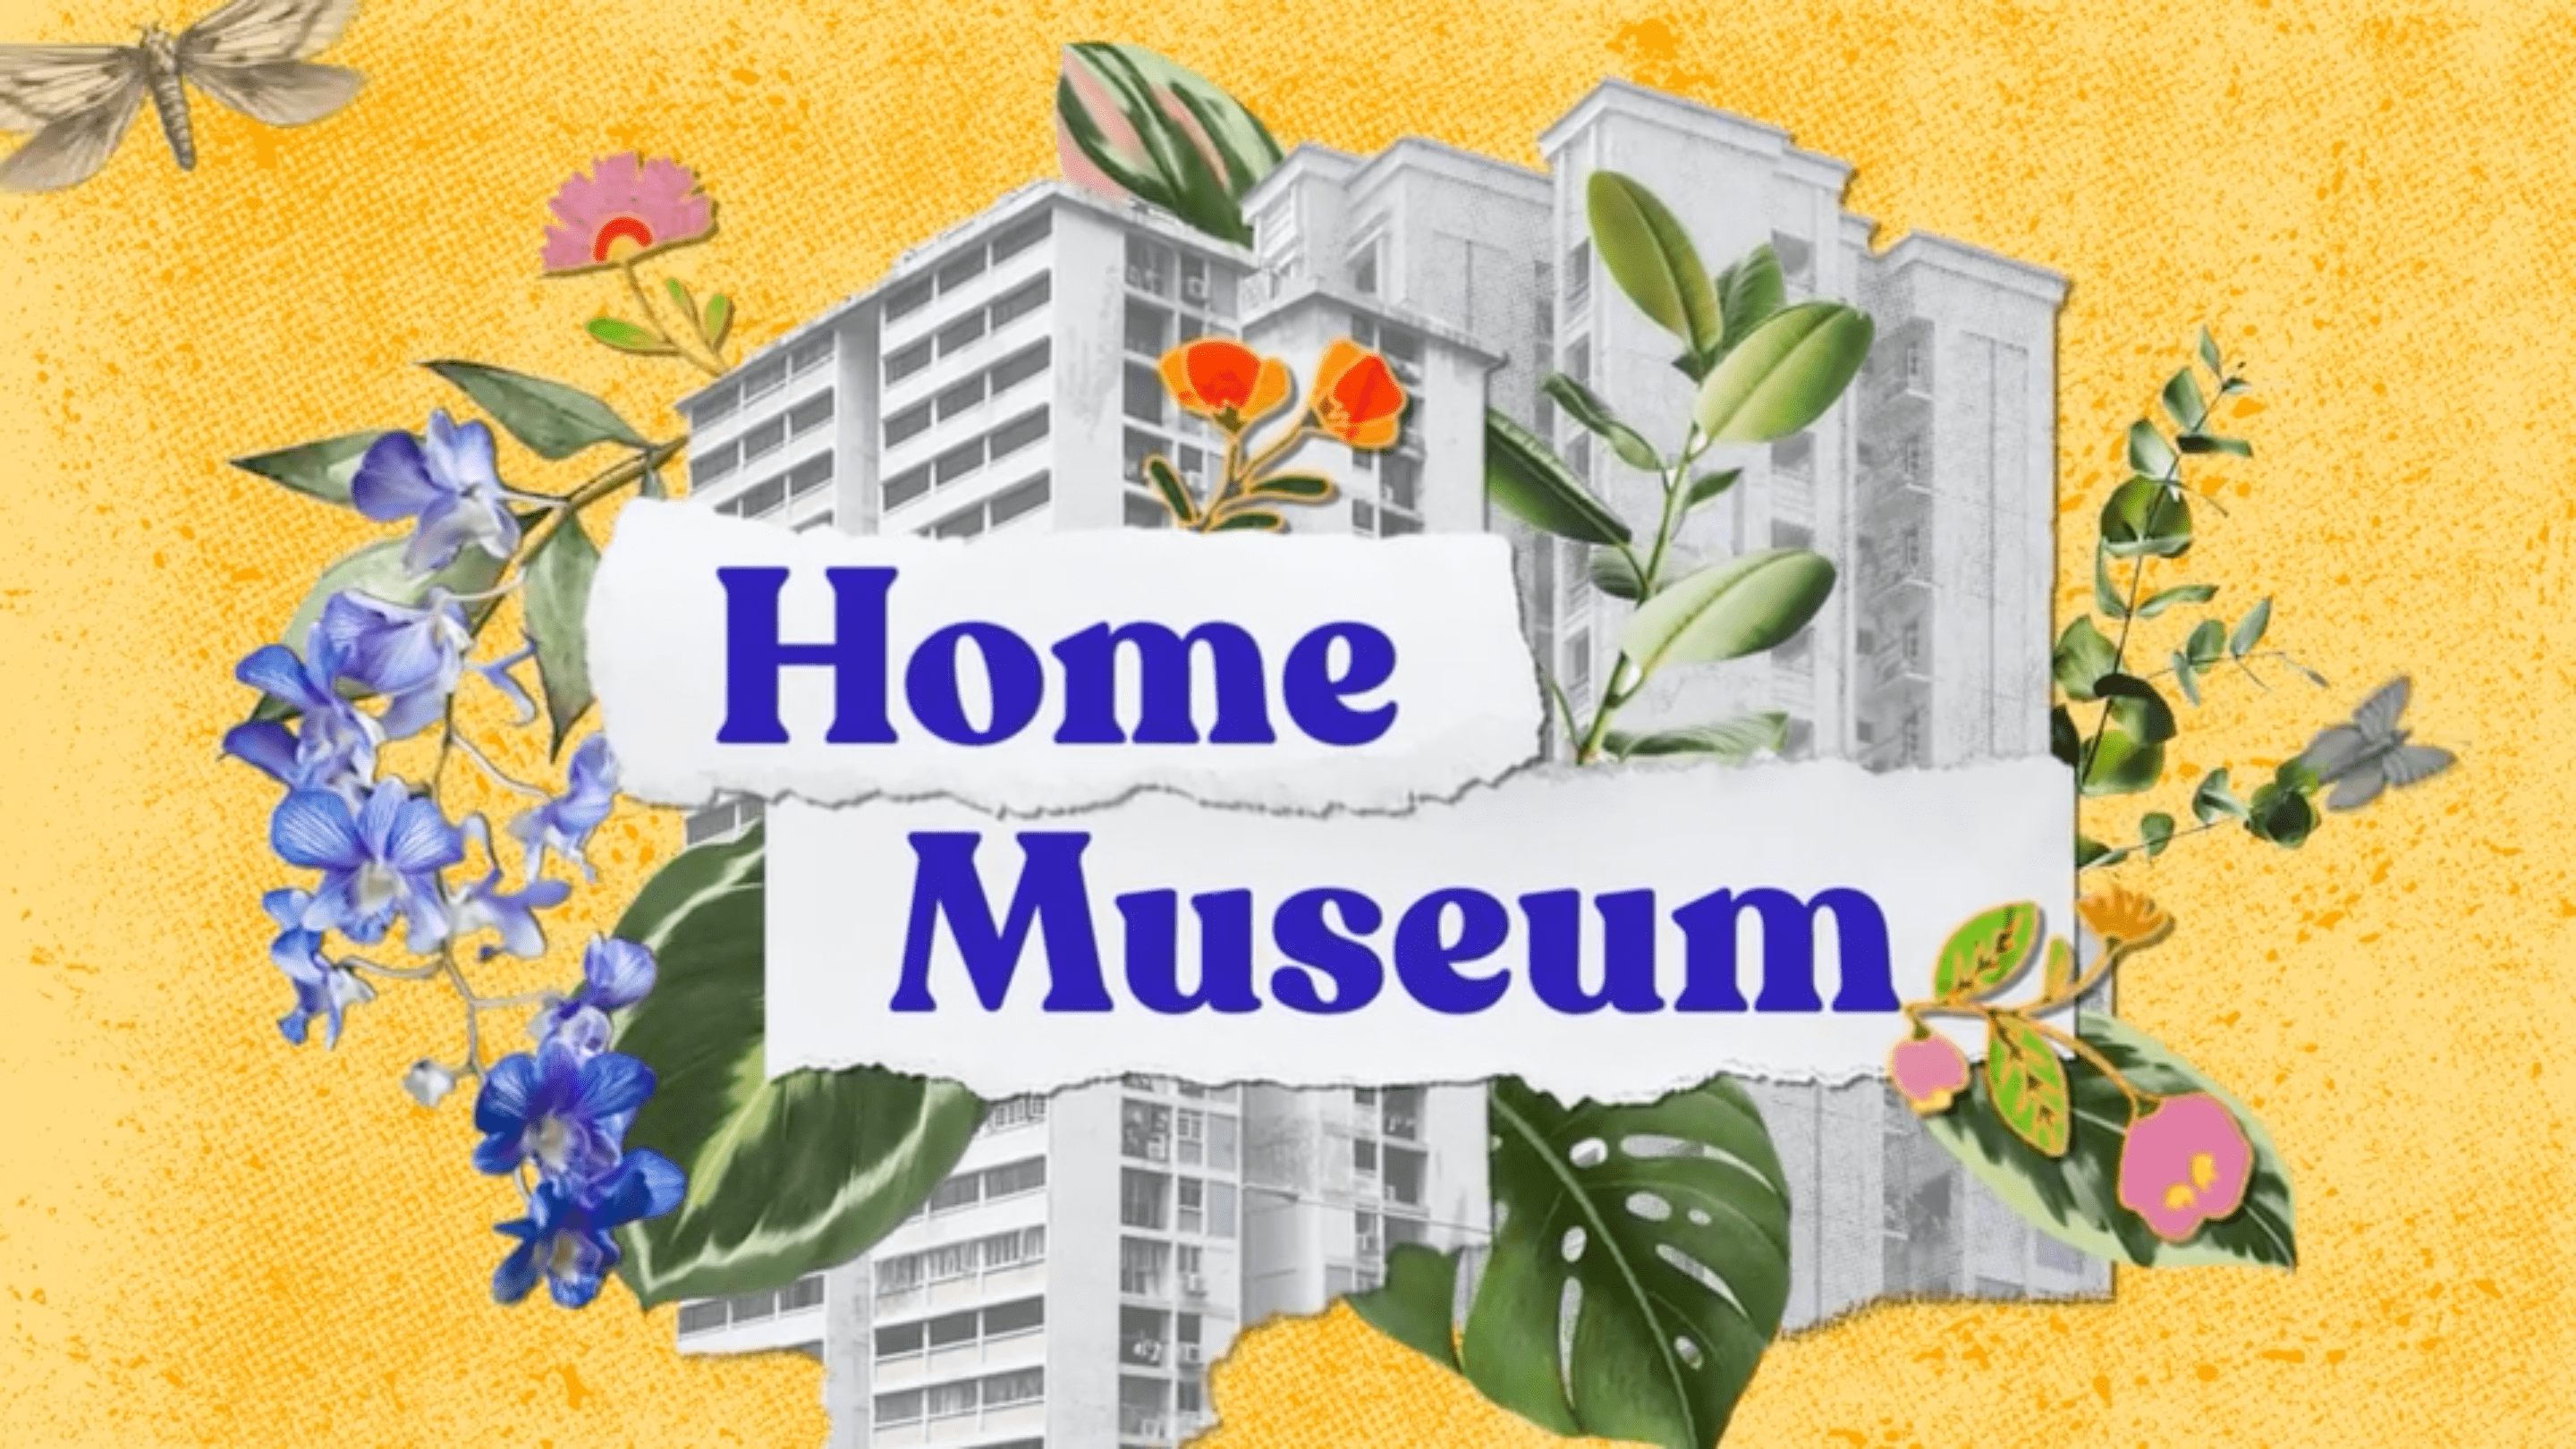 104A_Home Museum-min